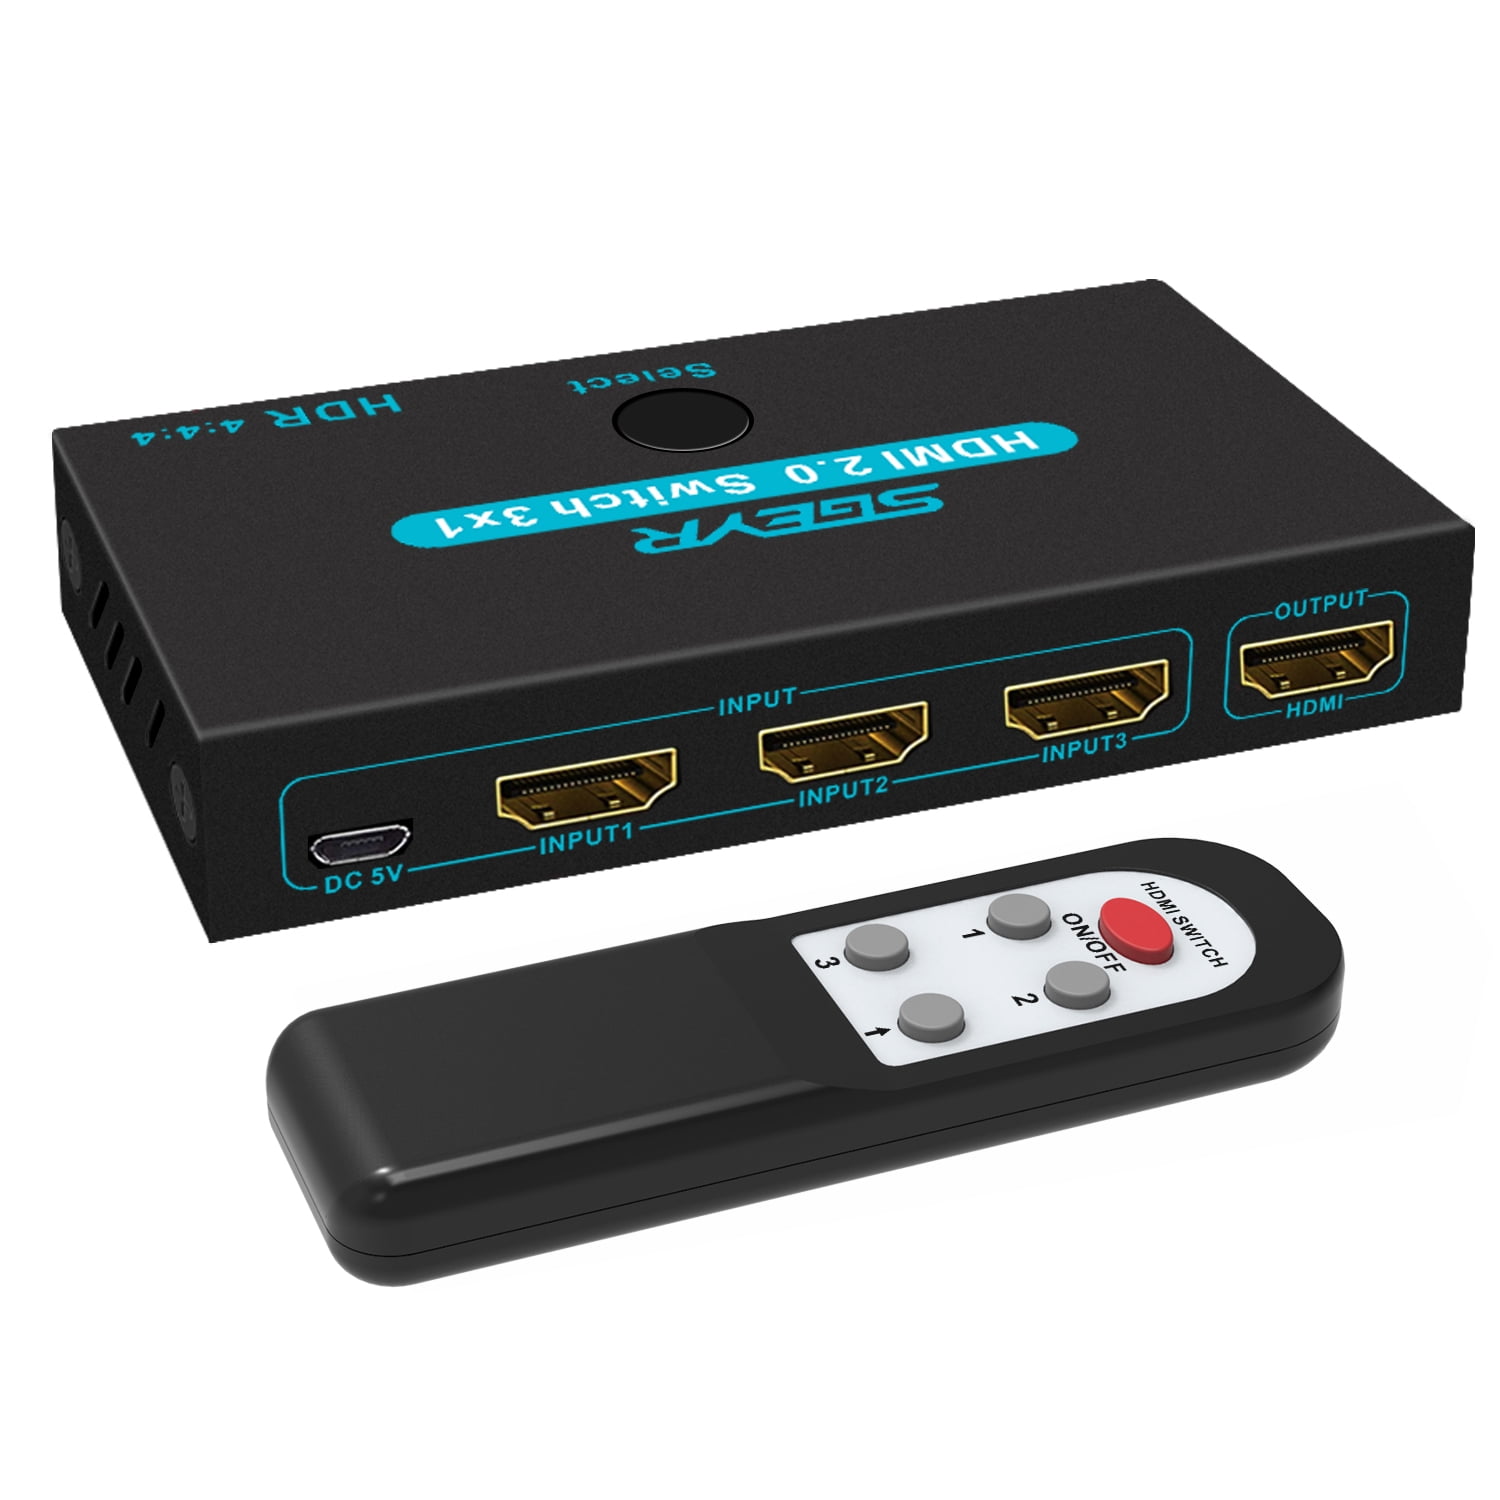 Compare prices for HDMI Switch 4K, HDMI Switch Automatic/Manual HDMI  Switcher 5 in 1 Out HDMI Splitter, HDMI Splitter Supports 4K  60hz/2K/1080P/3D/HDCP 2.2/UHD/HDR for PS 3/4/Xbox One/360/DVD/HDTV etc  across all European